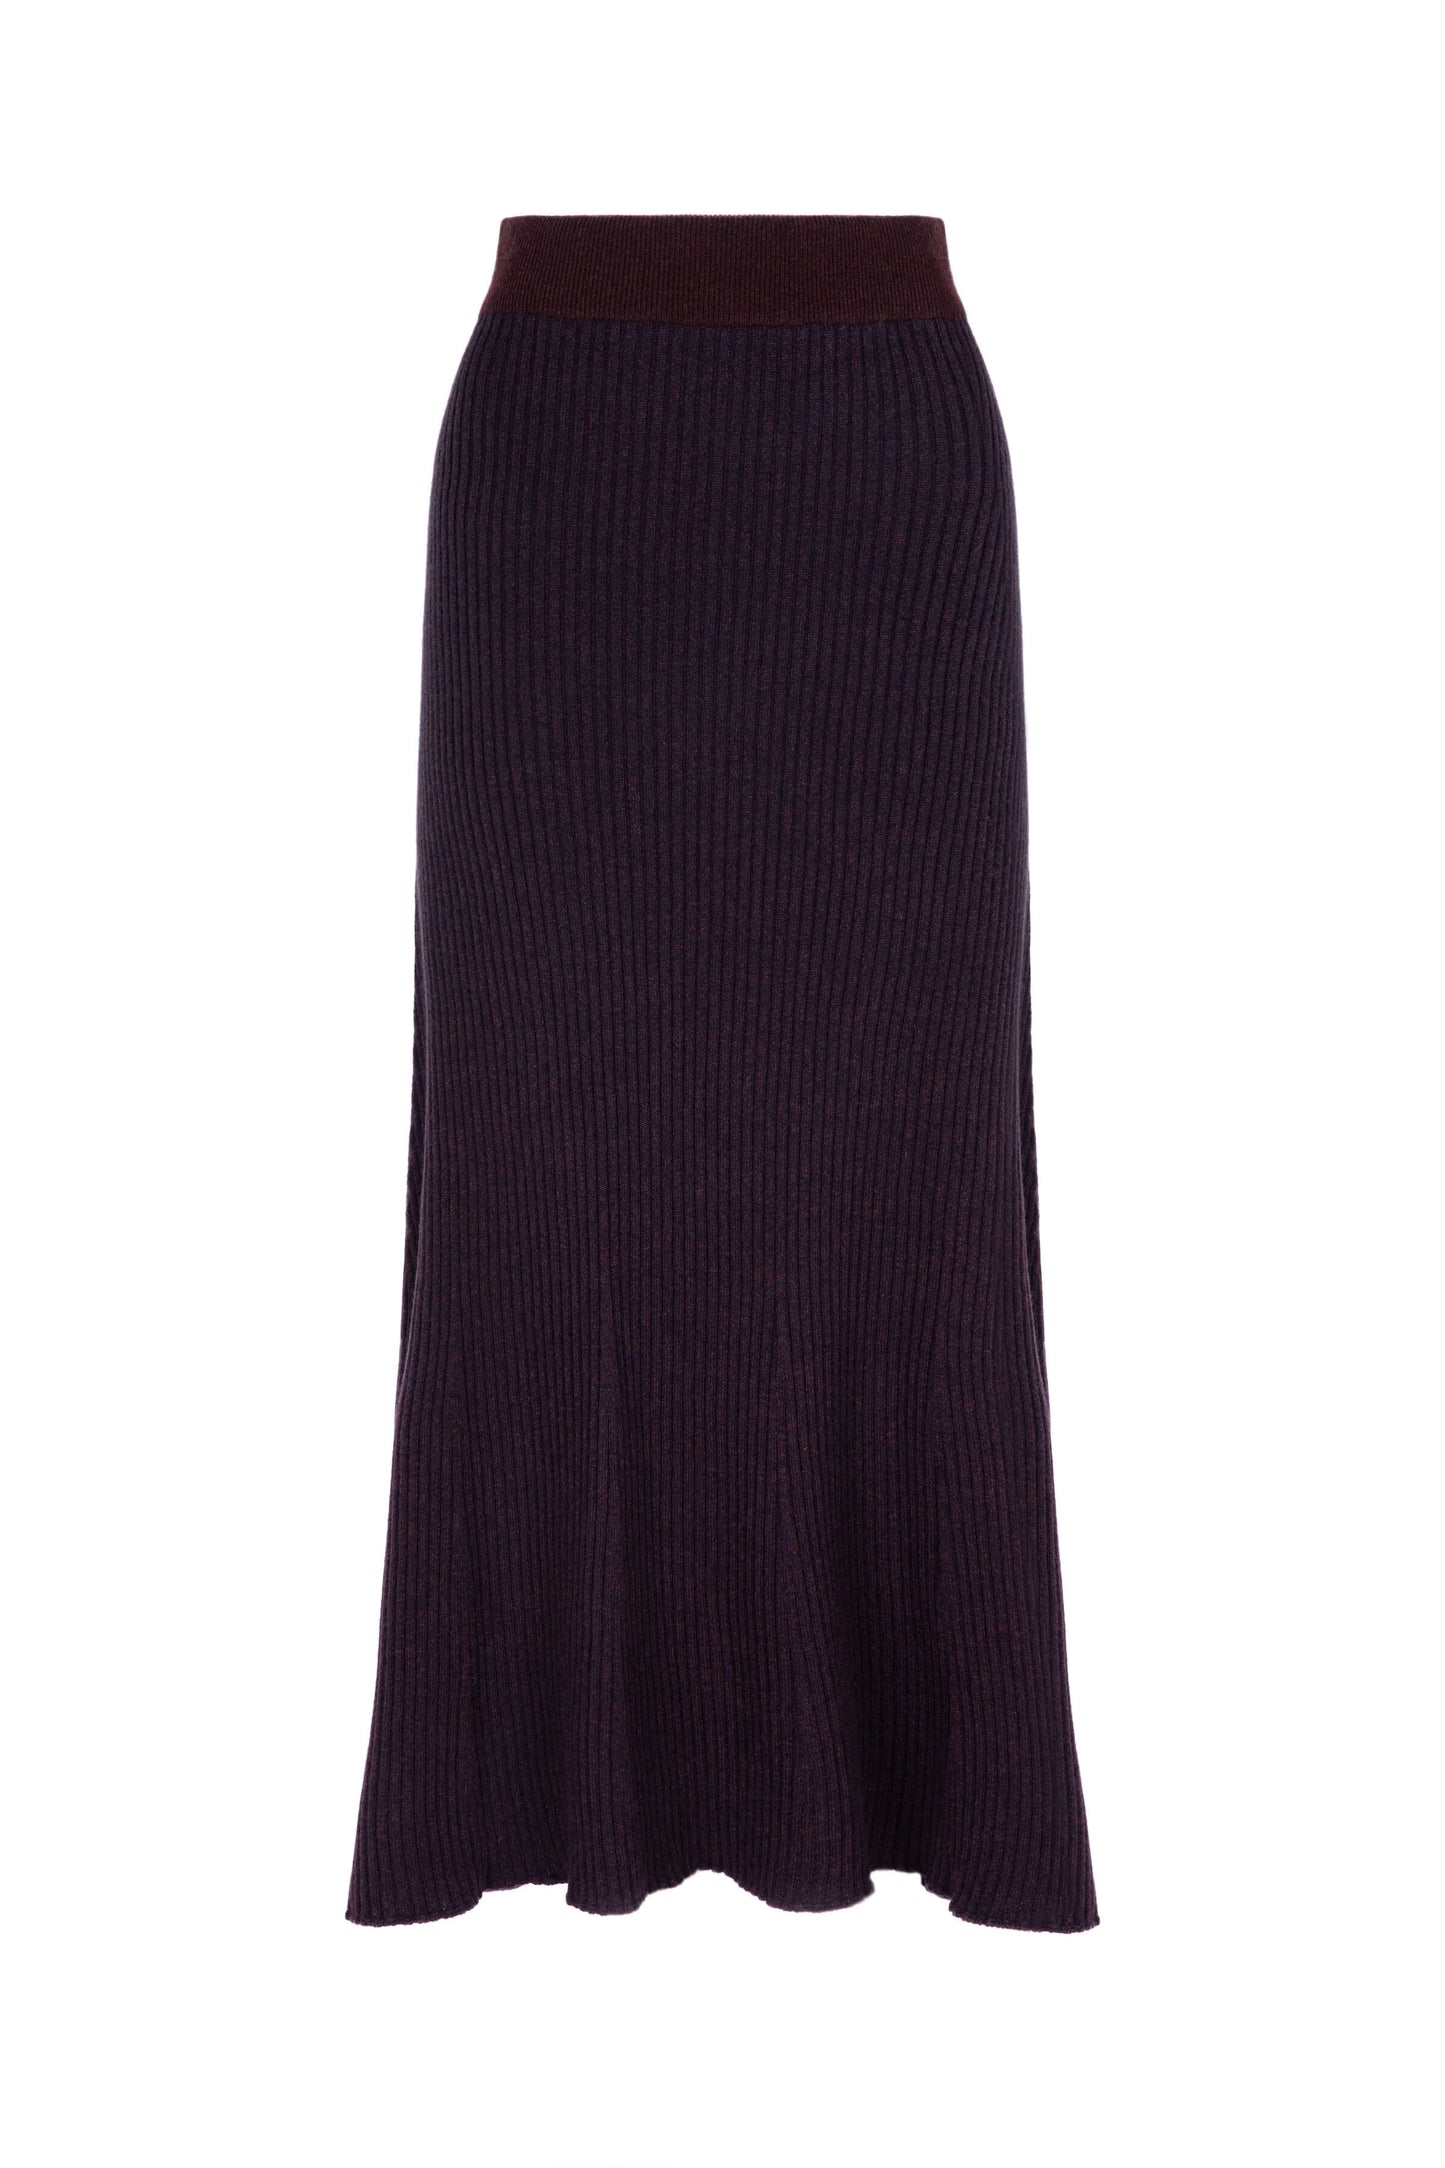 Ribbed Marl Cashmere Skirt